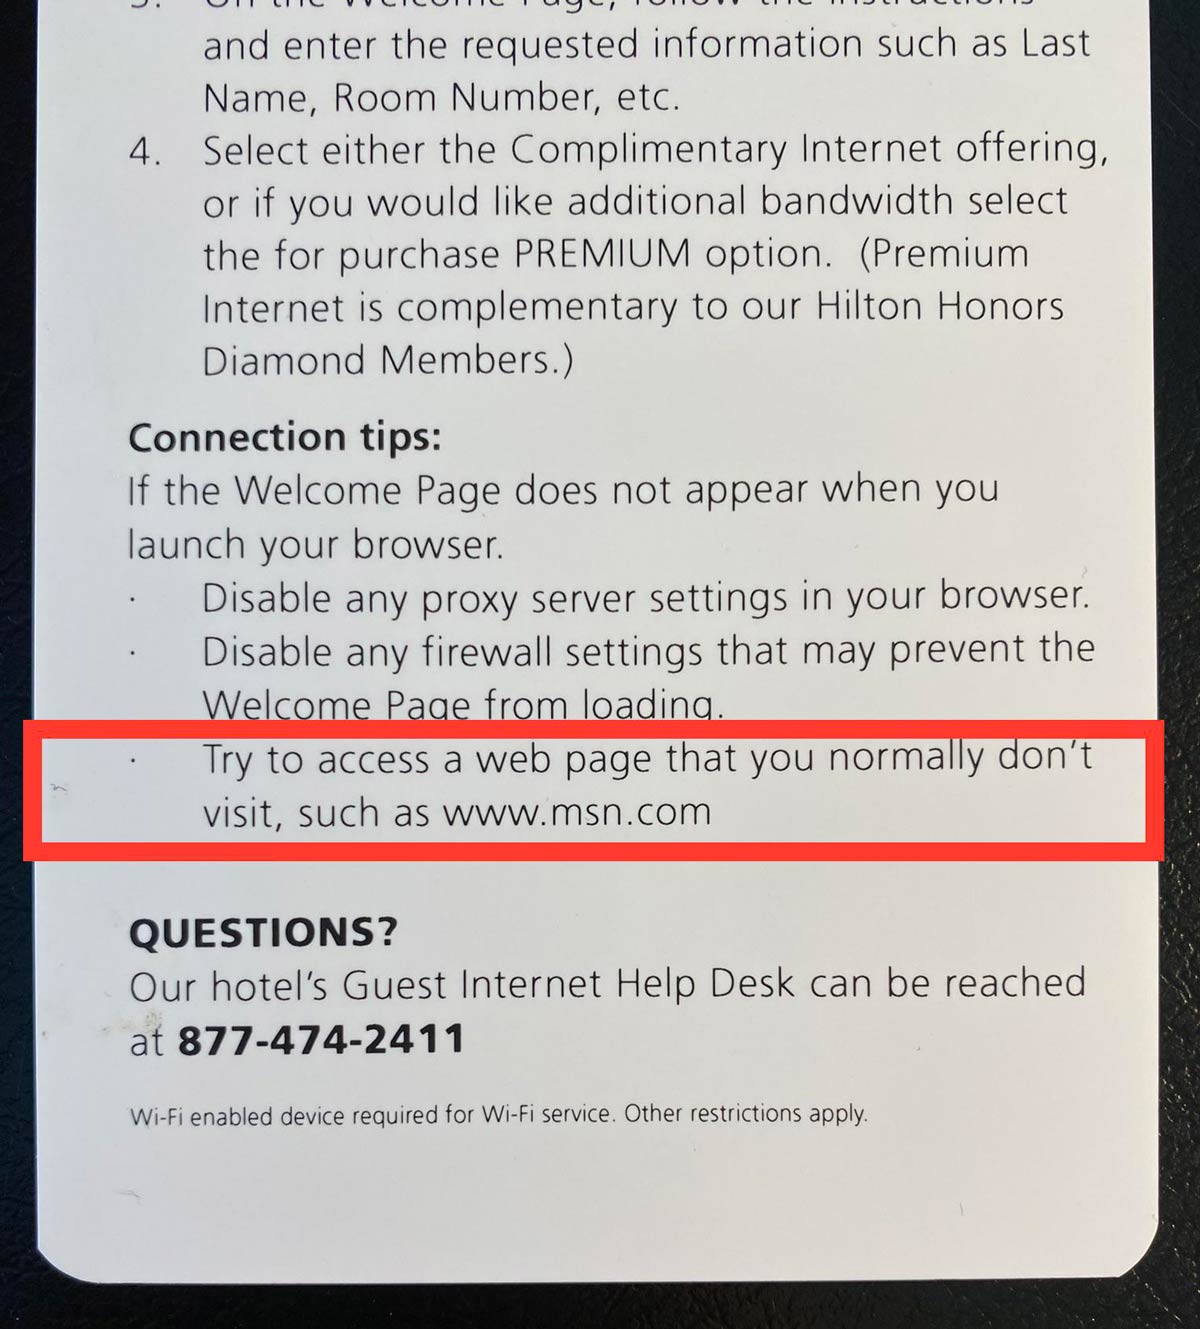 Hotel recommendation on testing your internet connection